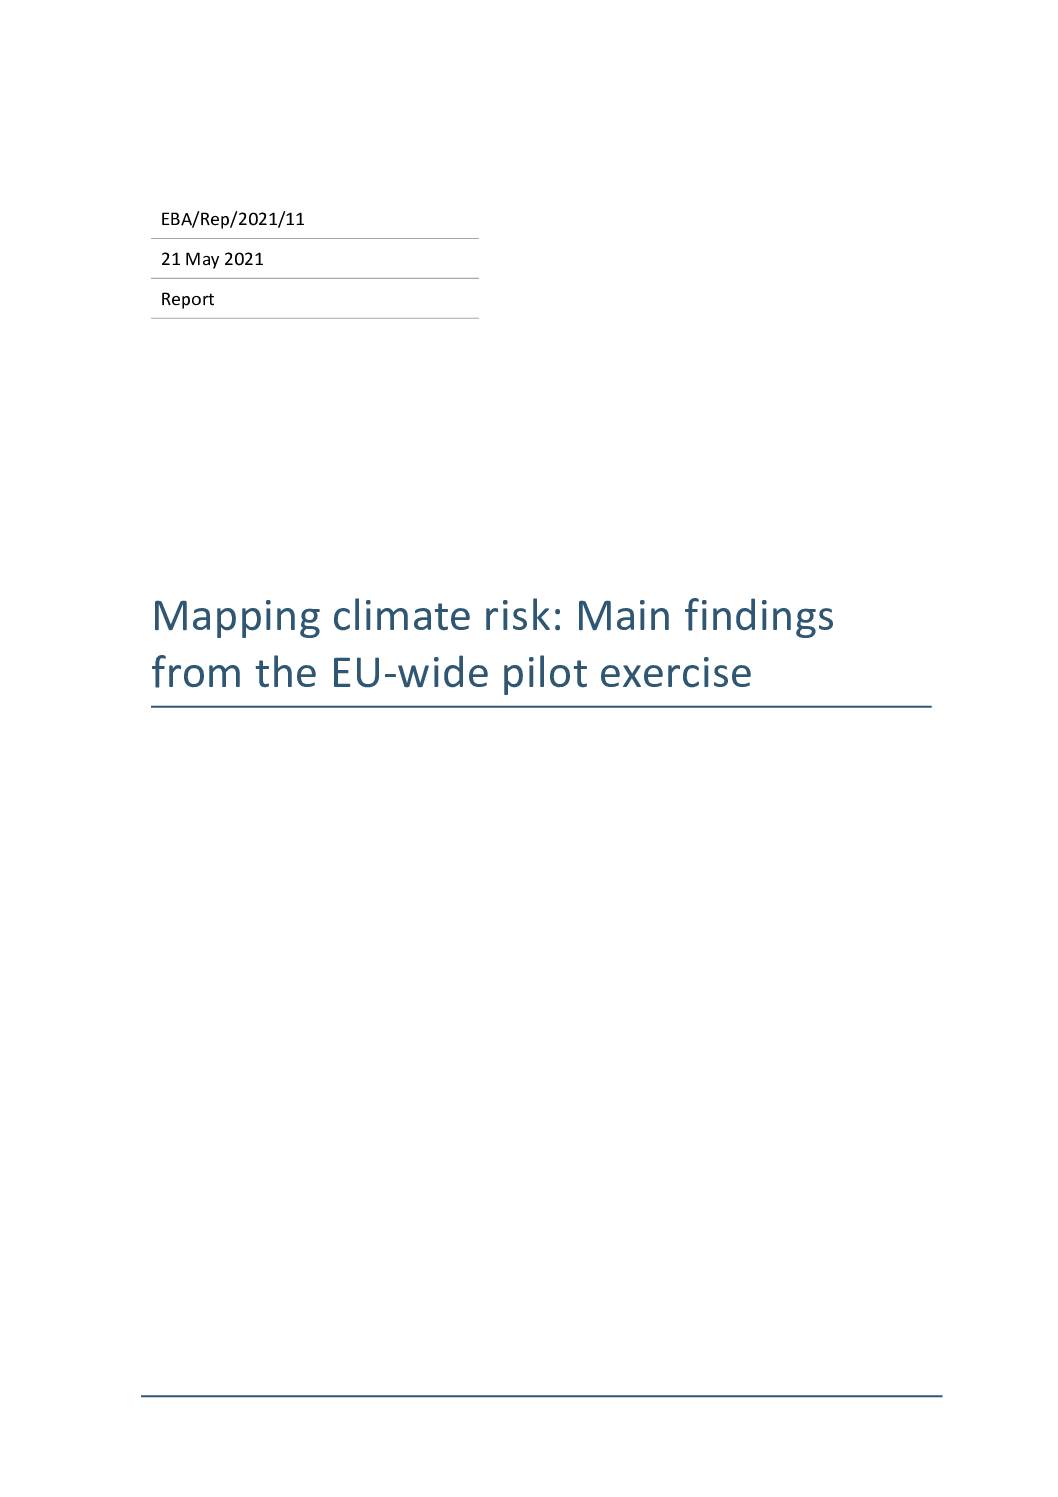 Mapping Climate Risk: Main Findings from the EU-Wide Pilot Exercise